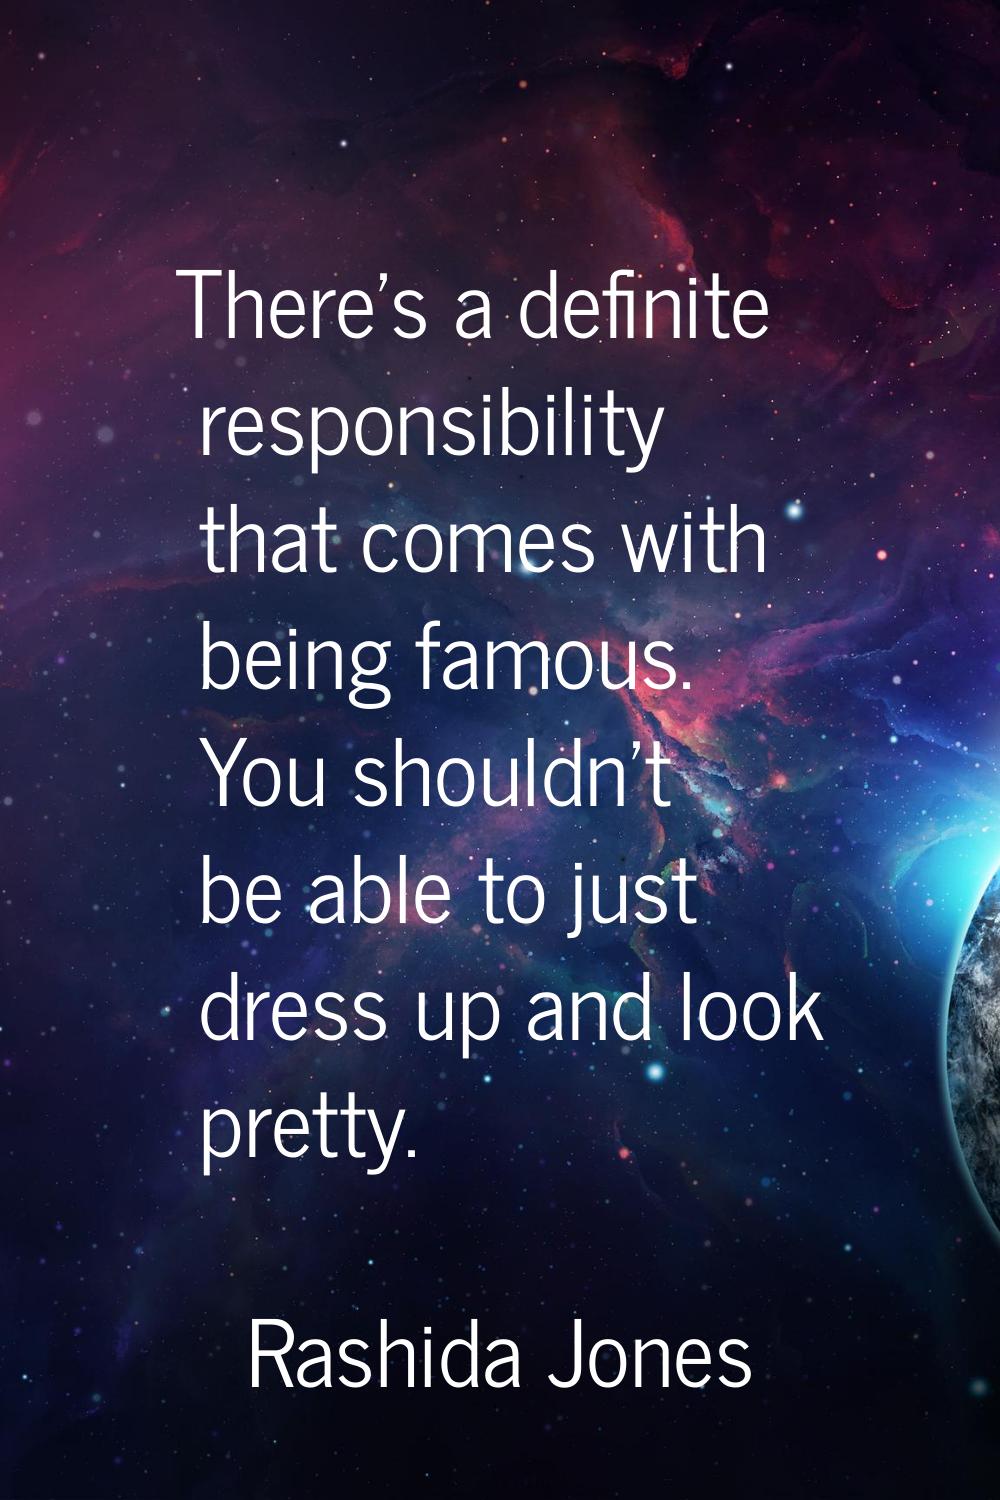 There's a definite responsibility that comes with being famous. You shouldn't be able to just dress